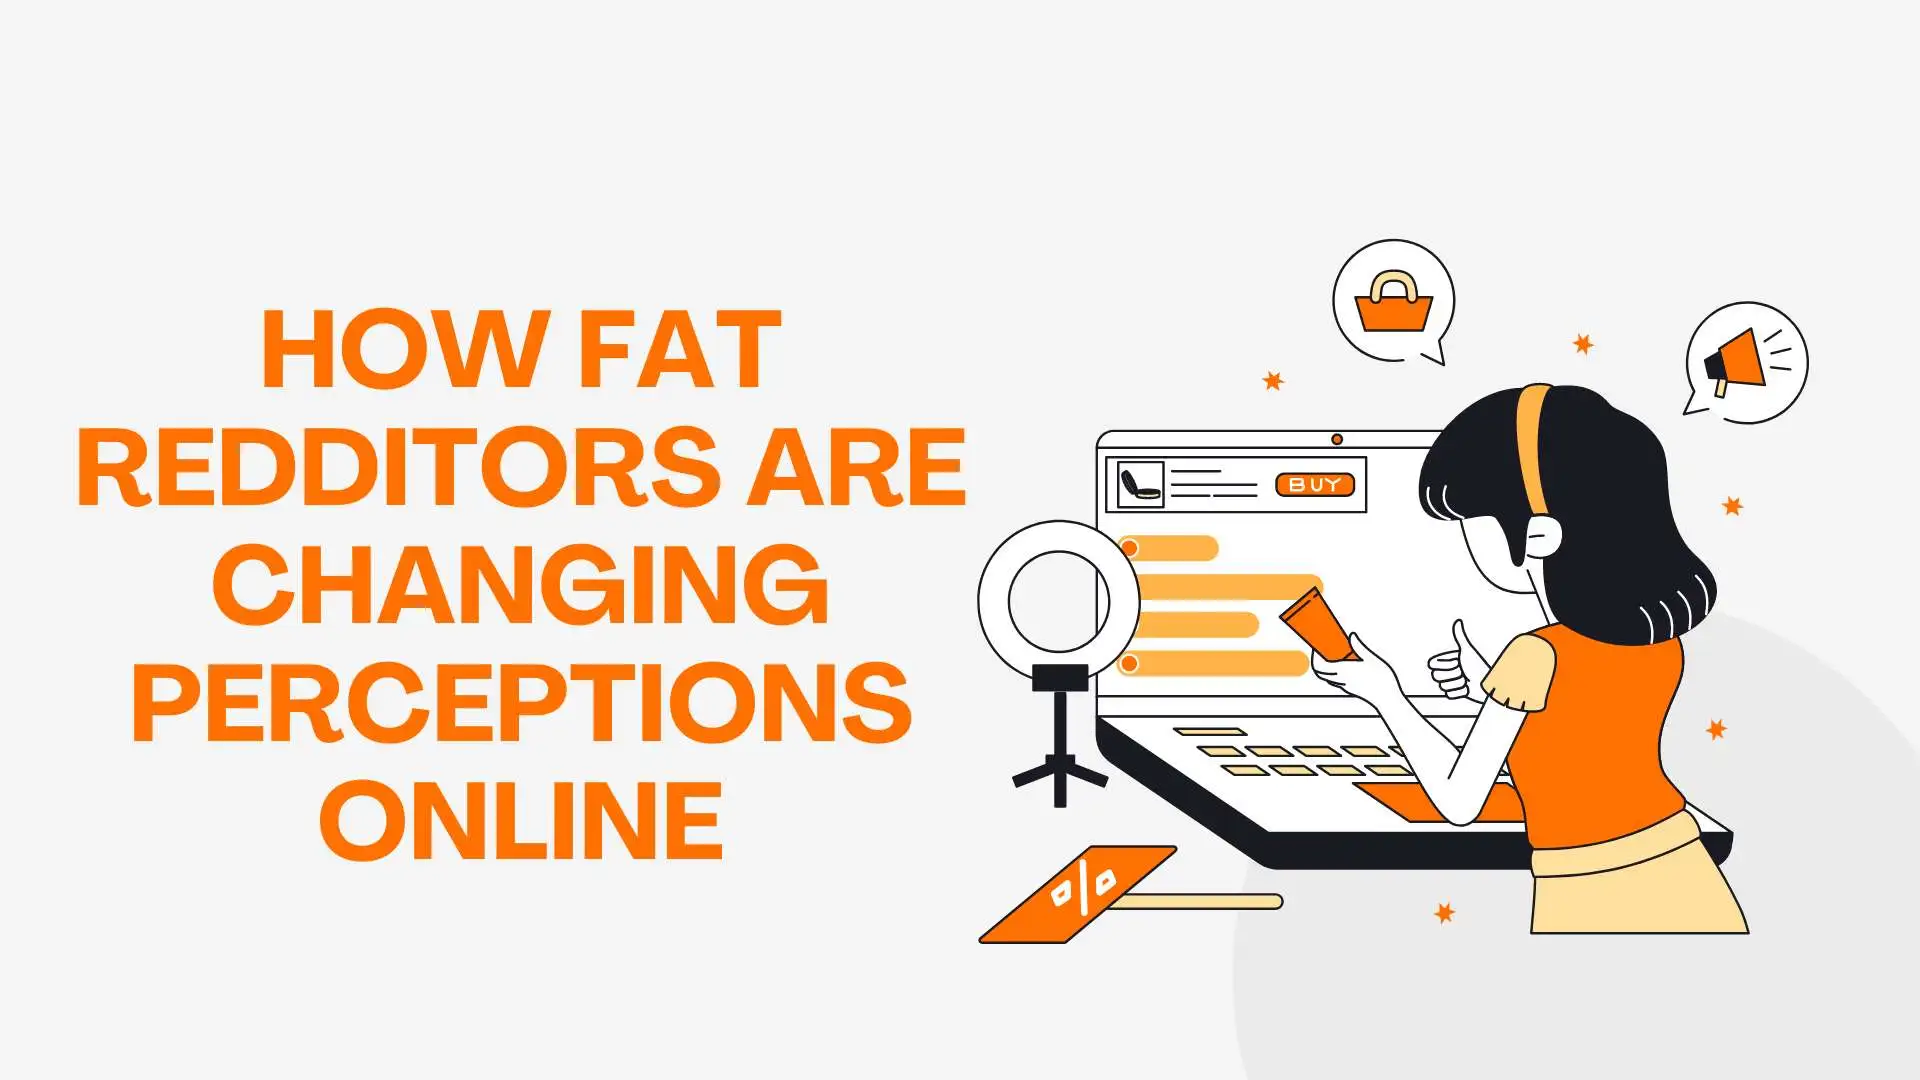 How Fat Redditors Are Changing Perceptions Online